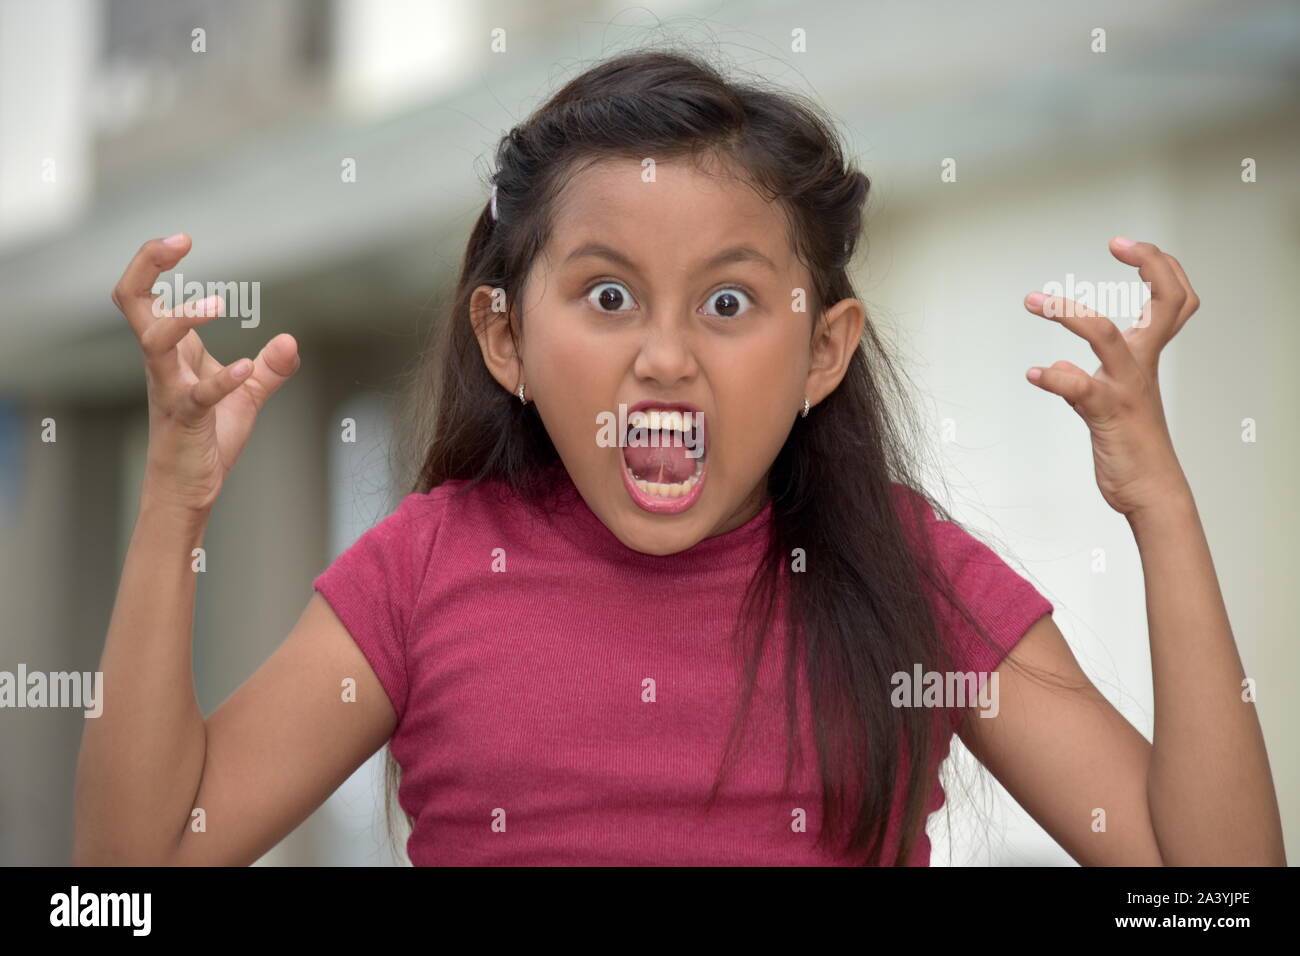 Stressed Young Asian Child Stock Photo